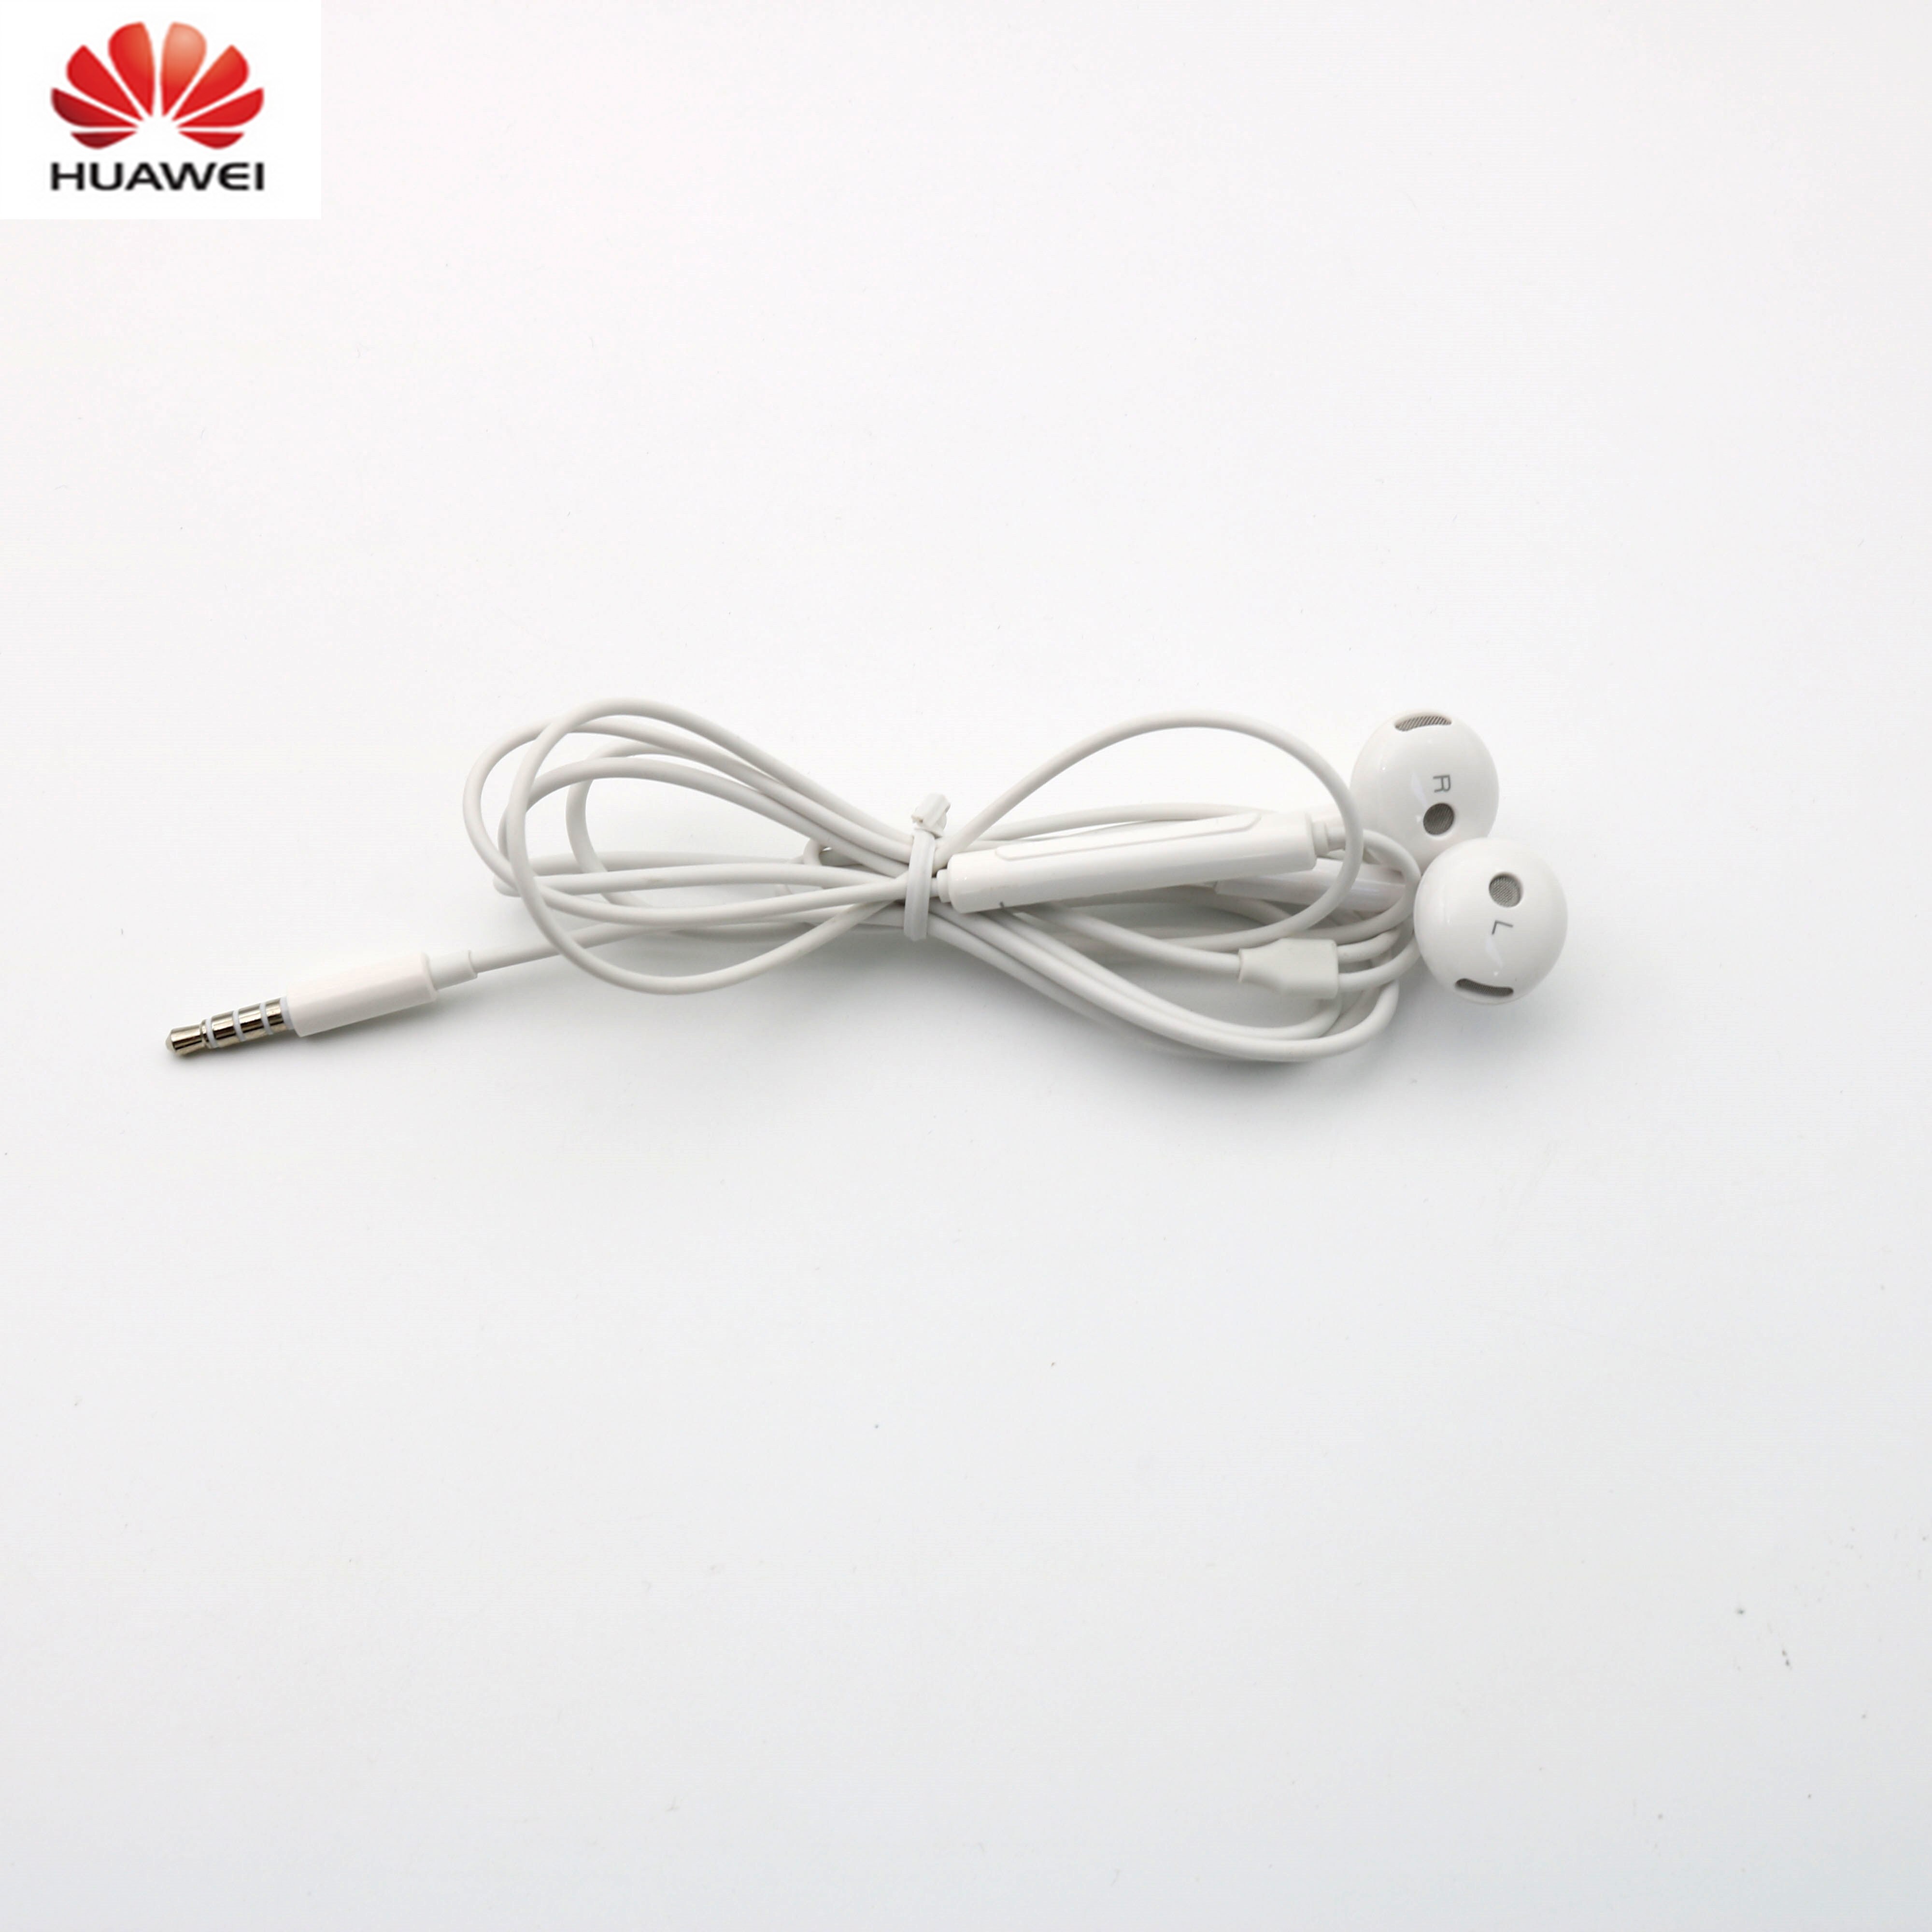 Original Huawei Honor AM115 Earphone with 3.5mm in Ear Earbuds Headset Wired Control for Honor 8 Huawei P10 P9 P8 Mate9 phone: No packing